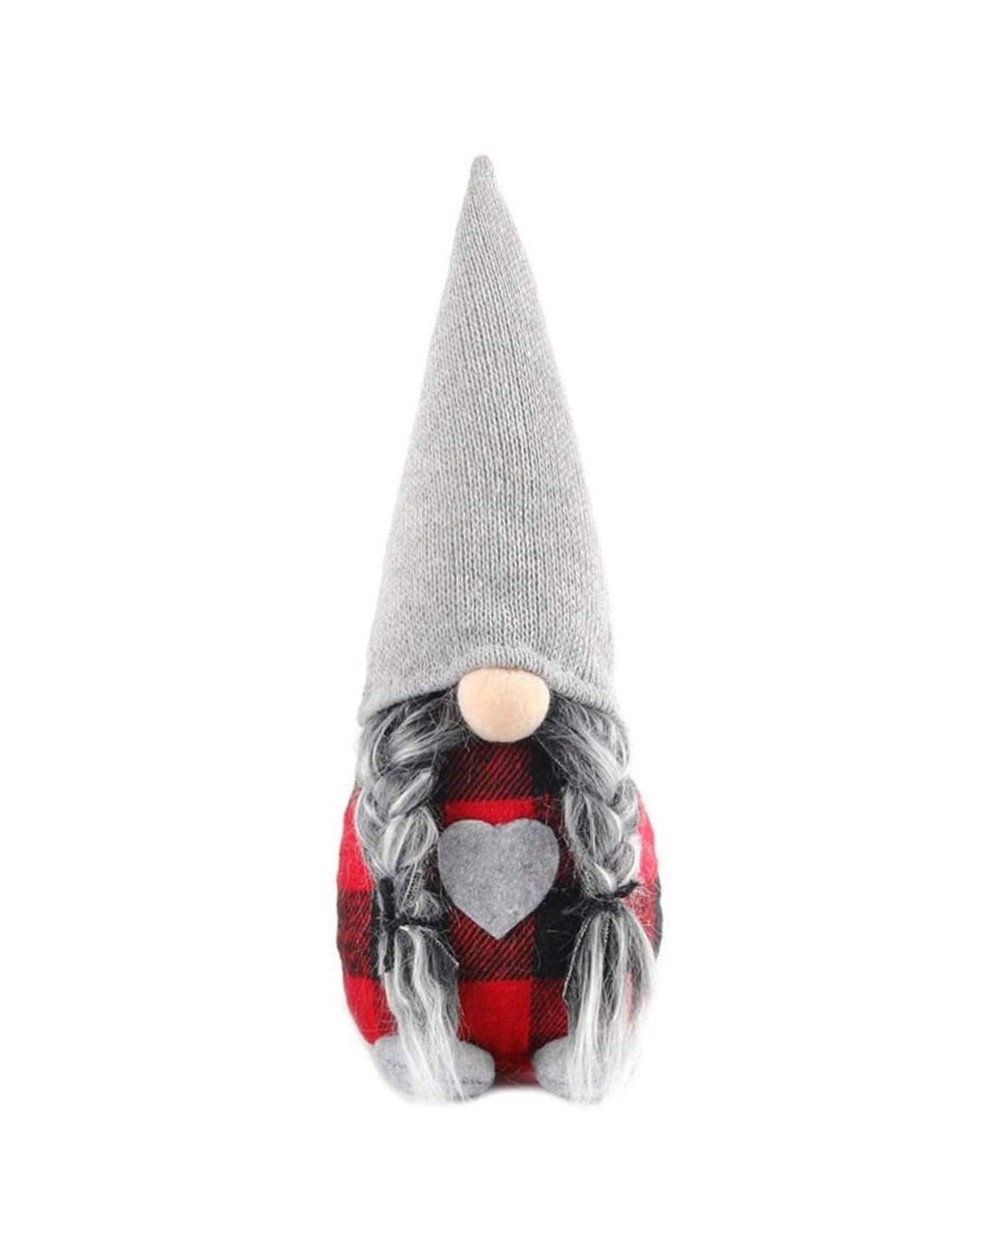 Ornaments Christmas Gnome Doll Ornament Plaid Swedish Tomte Christmas Elf Figurines Christmas Party Decoration Supplies Style...